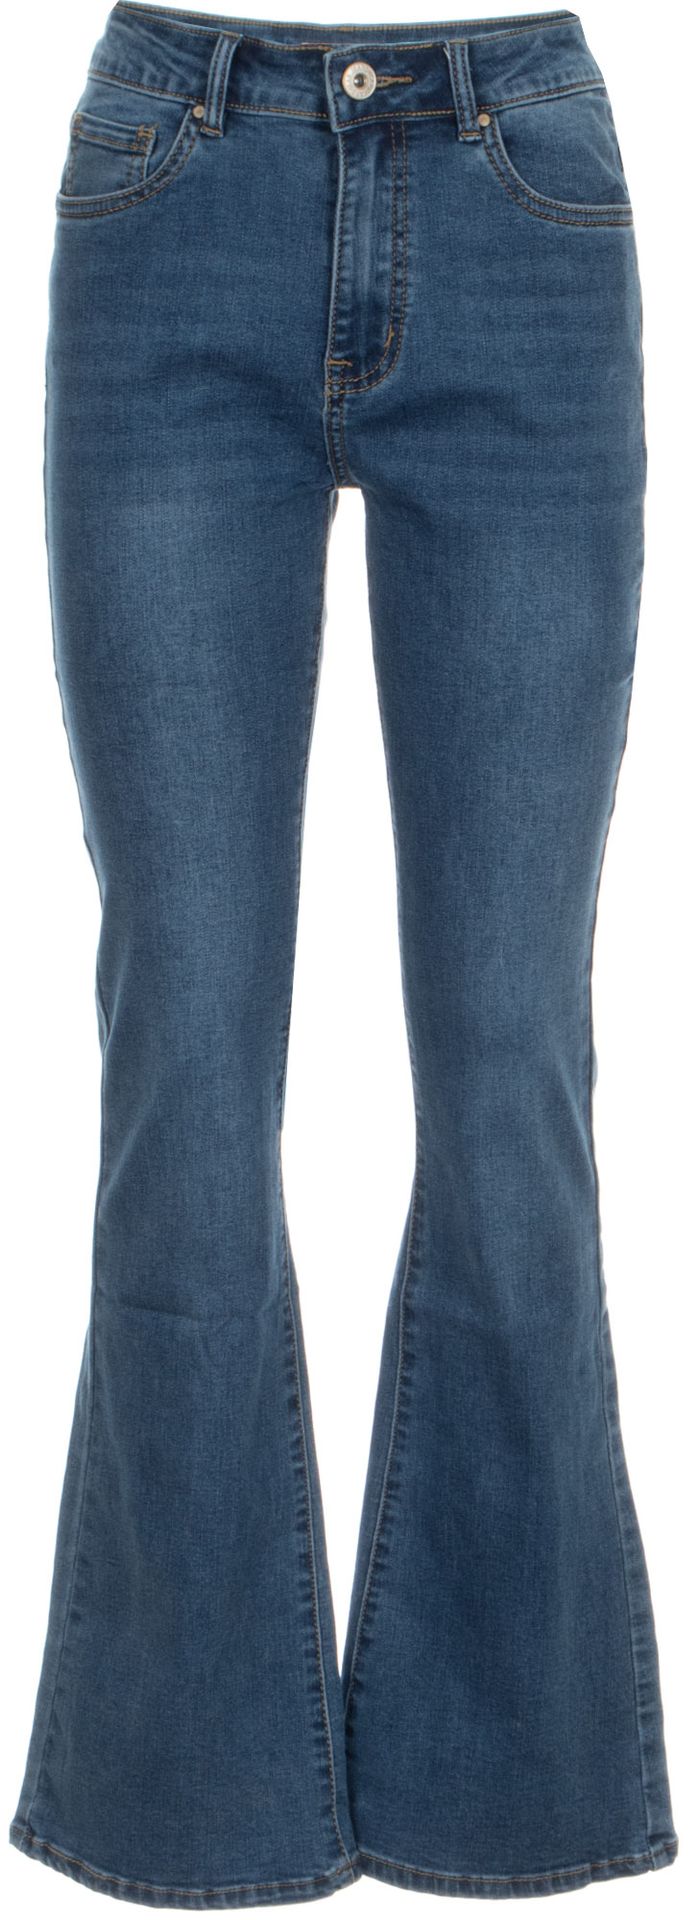 Norfy Norfy jeans Lindy Blauw 00076210-582